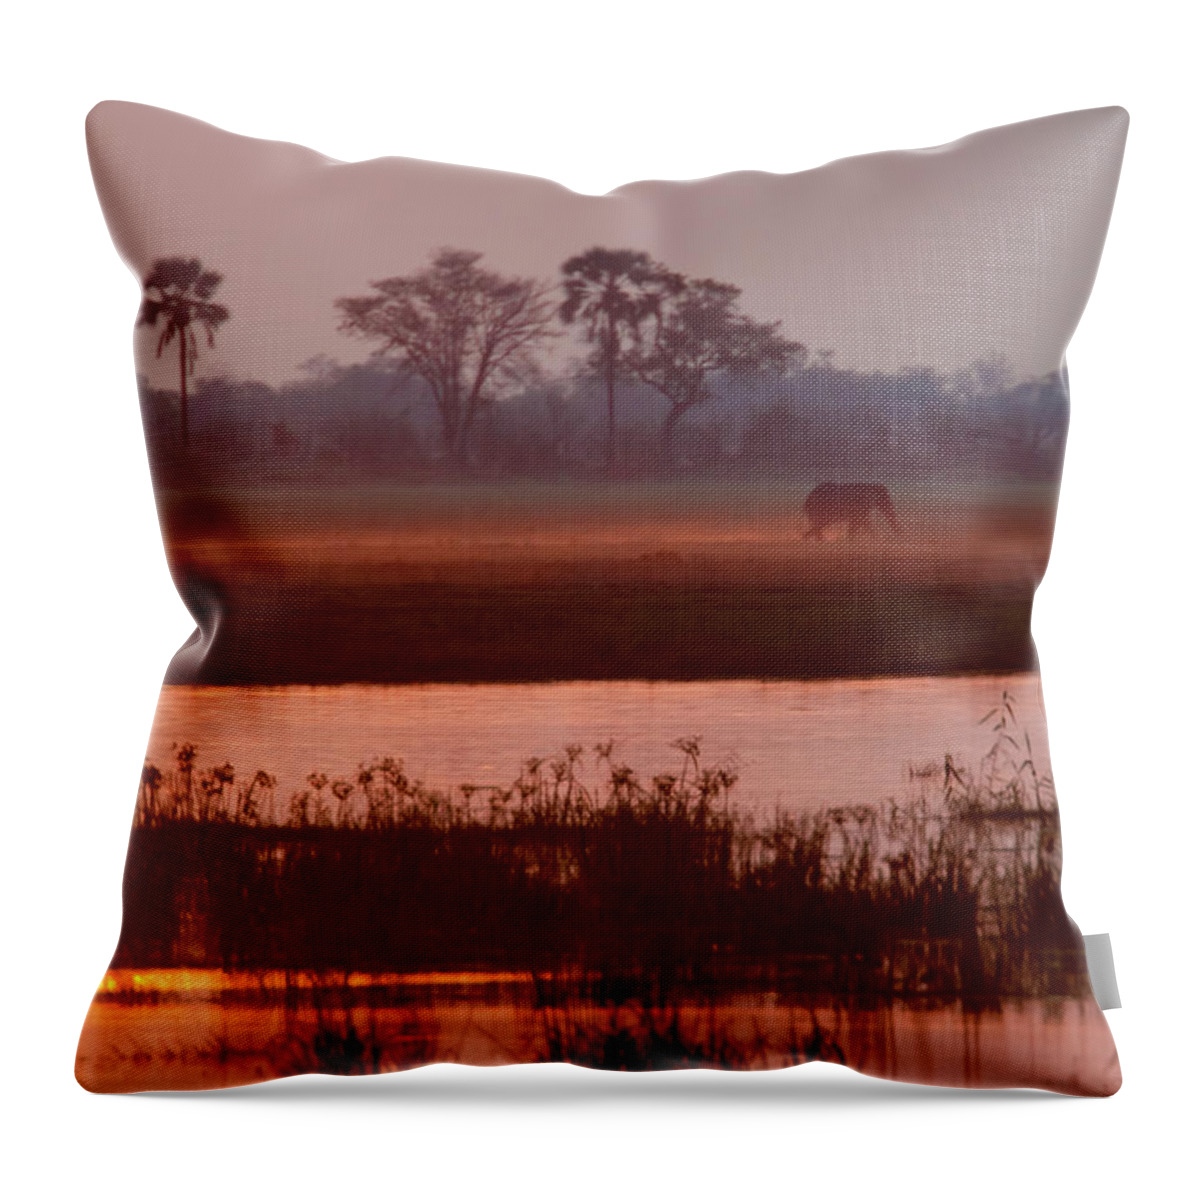 Botswana Throw Pillow featuring the photograph African Elephant, Okavango Delta by Mint Images/ Art Wolfe